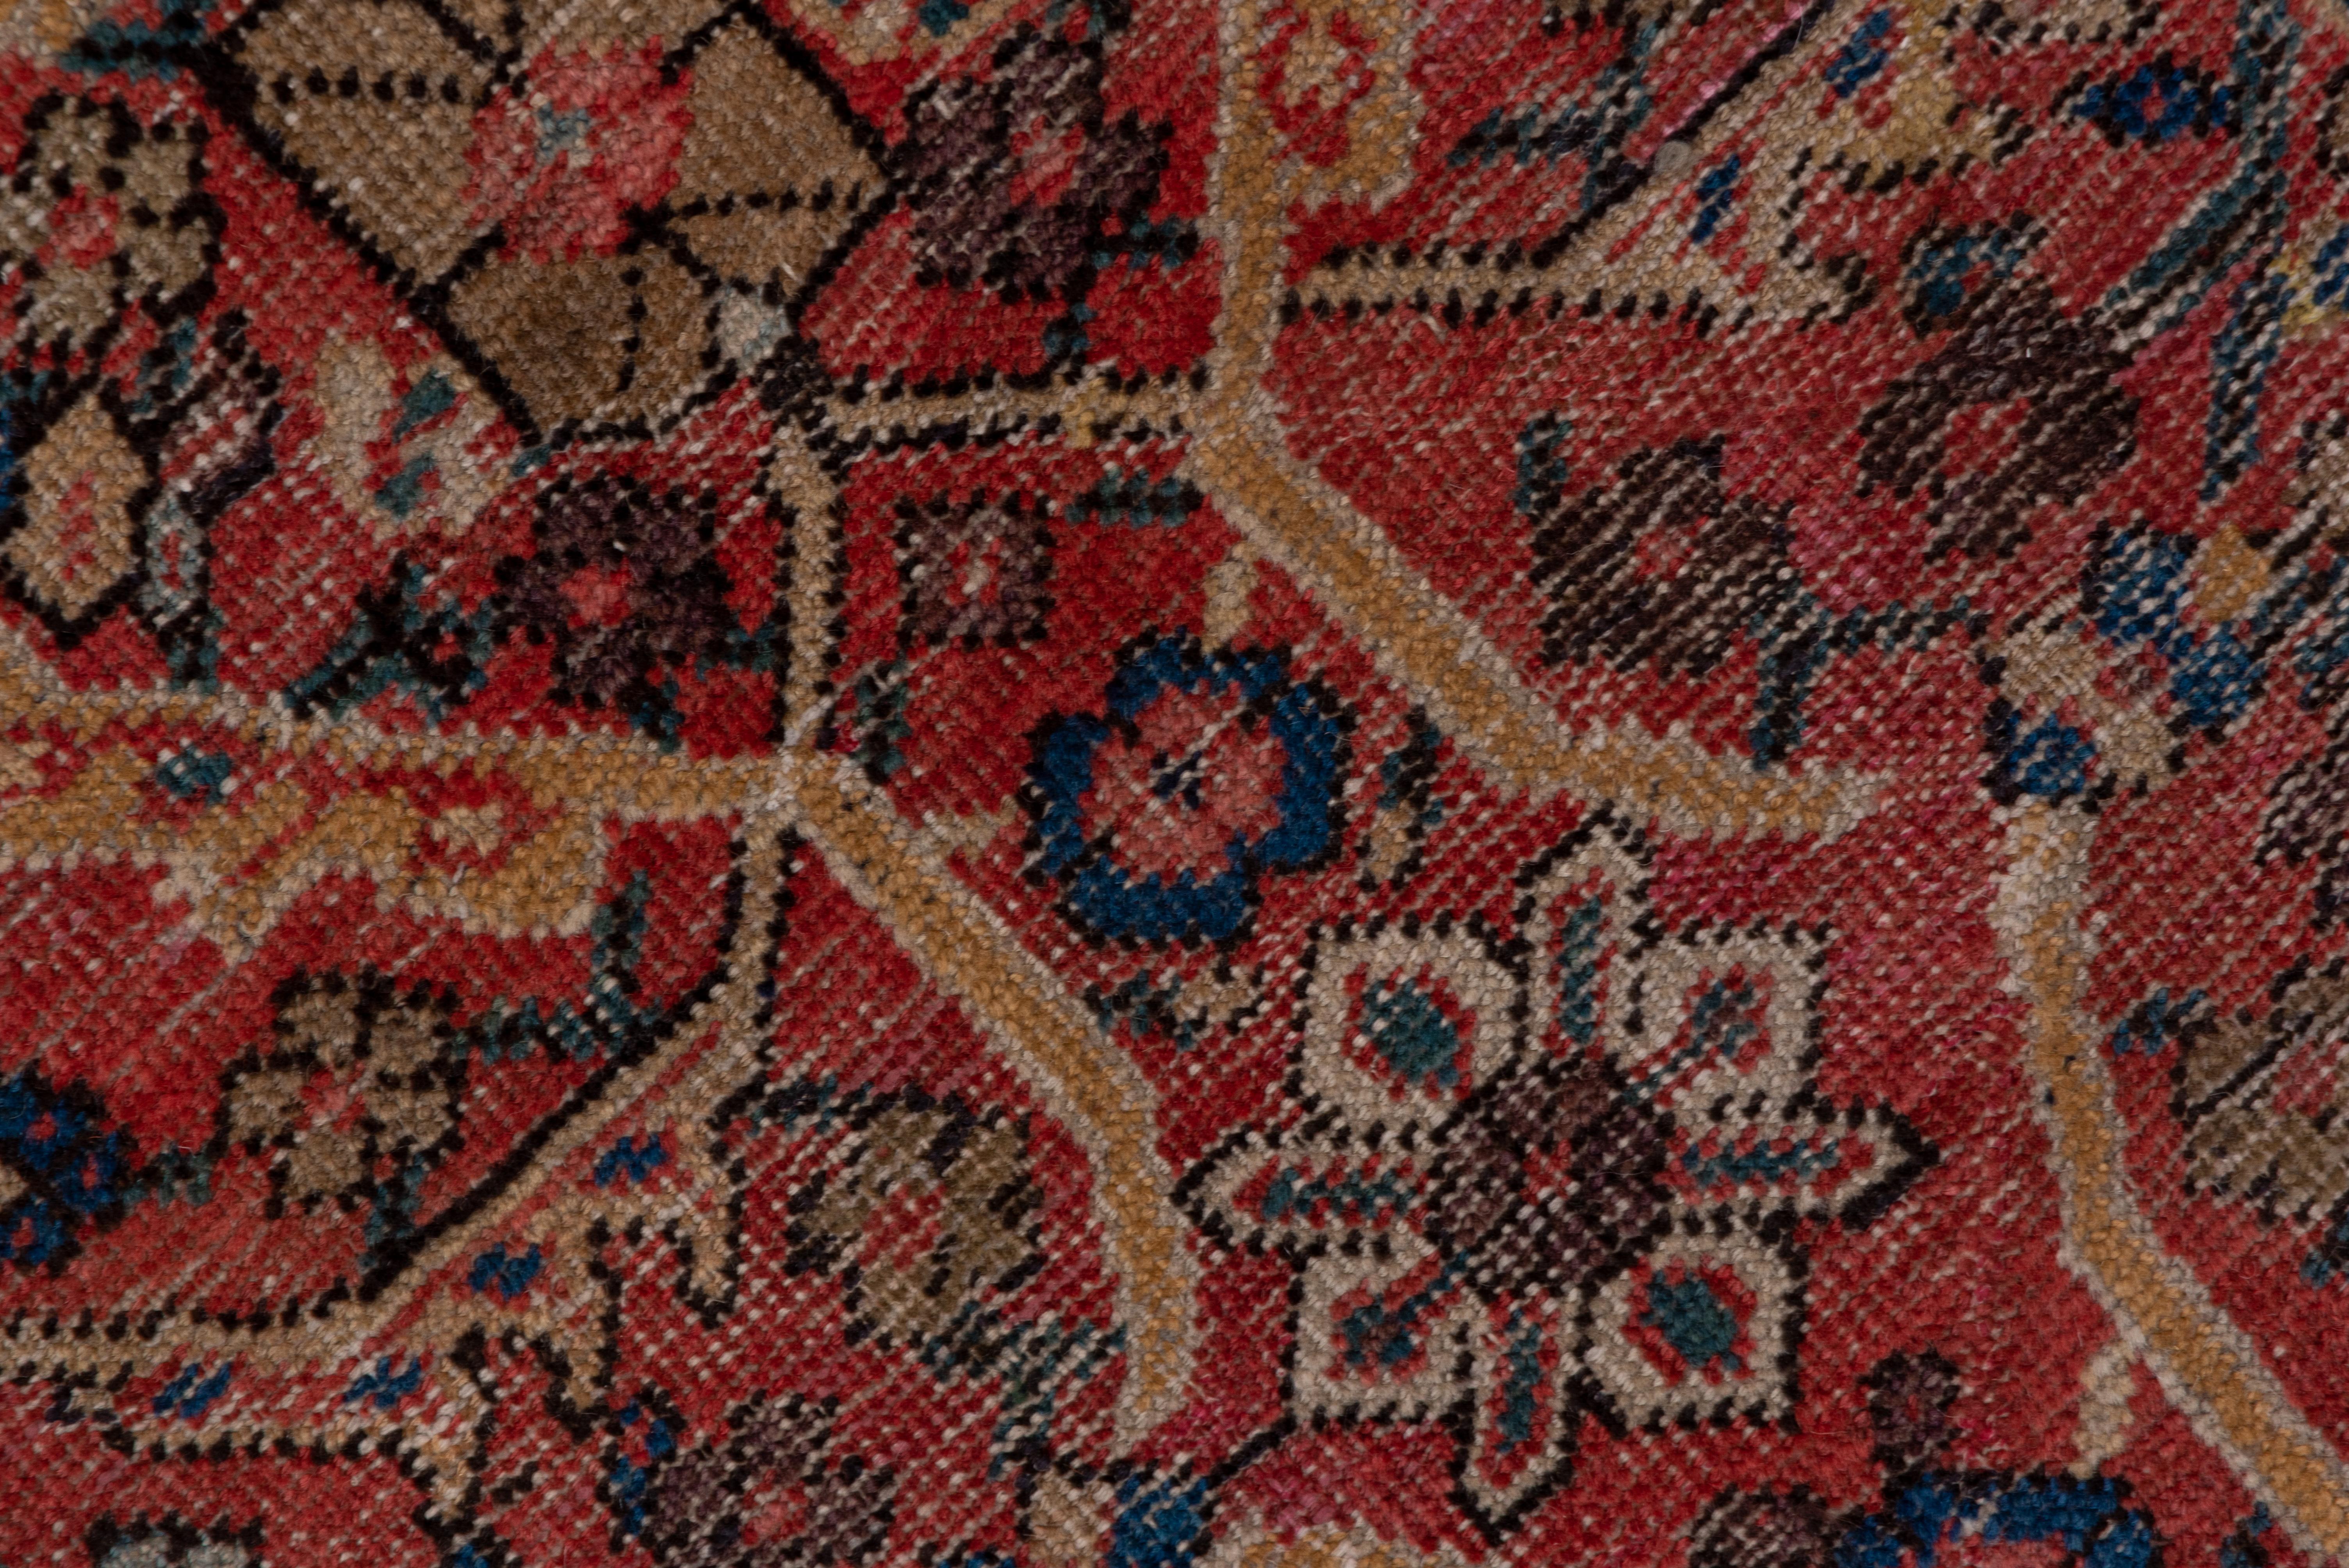 The coral red field of this allover pattern west Persian rustic carpet shows a 